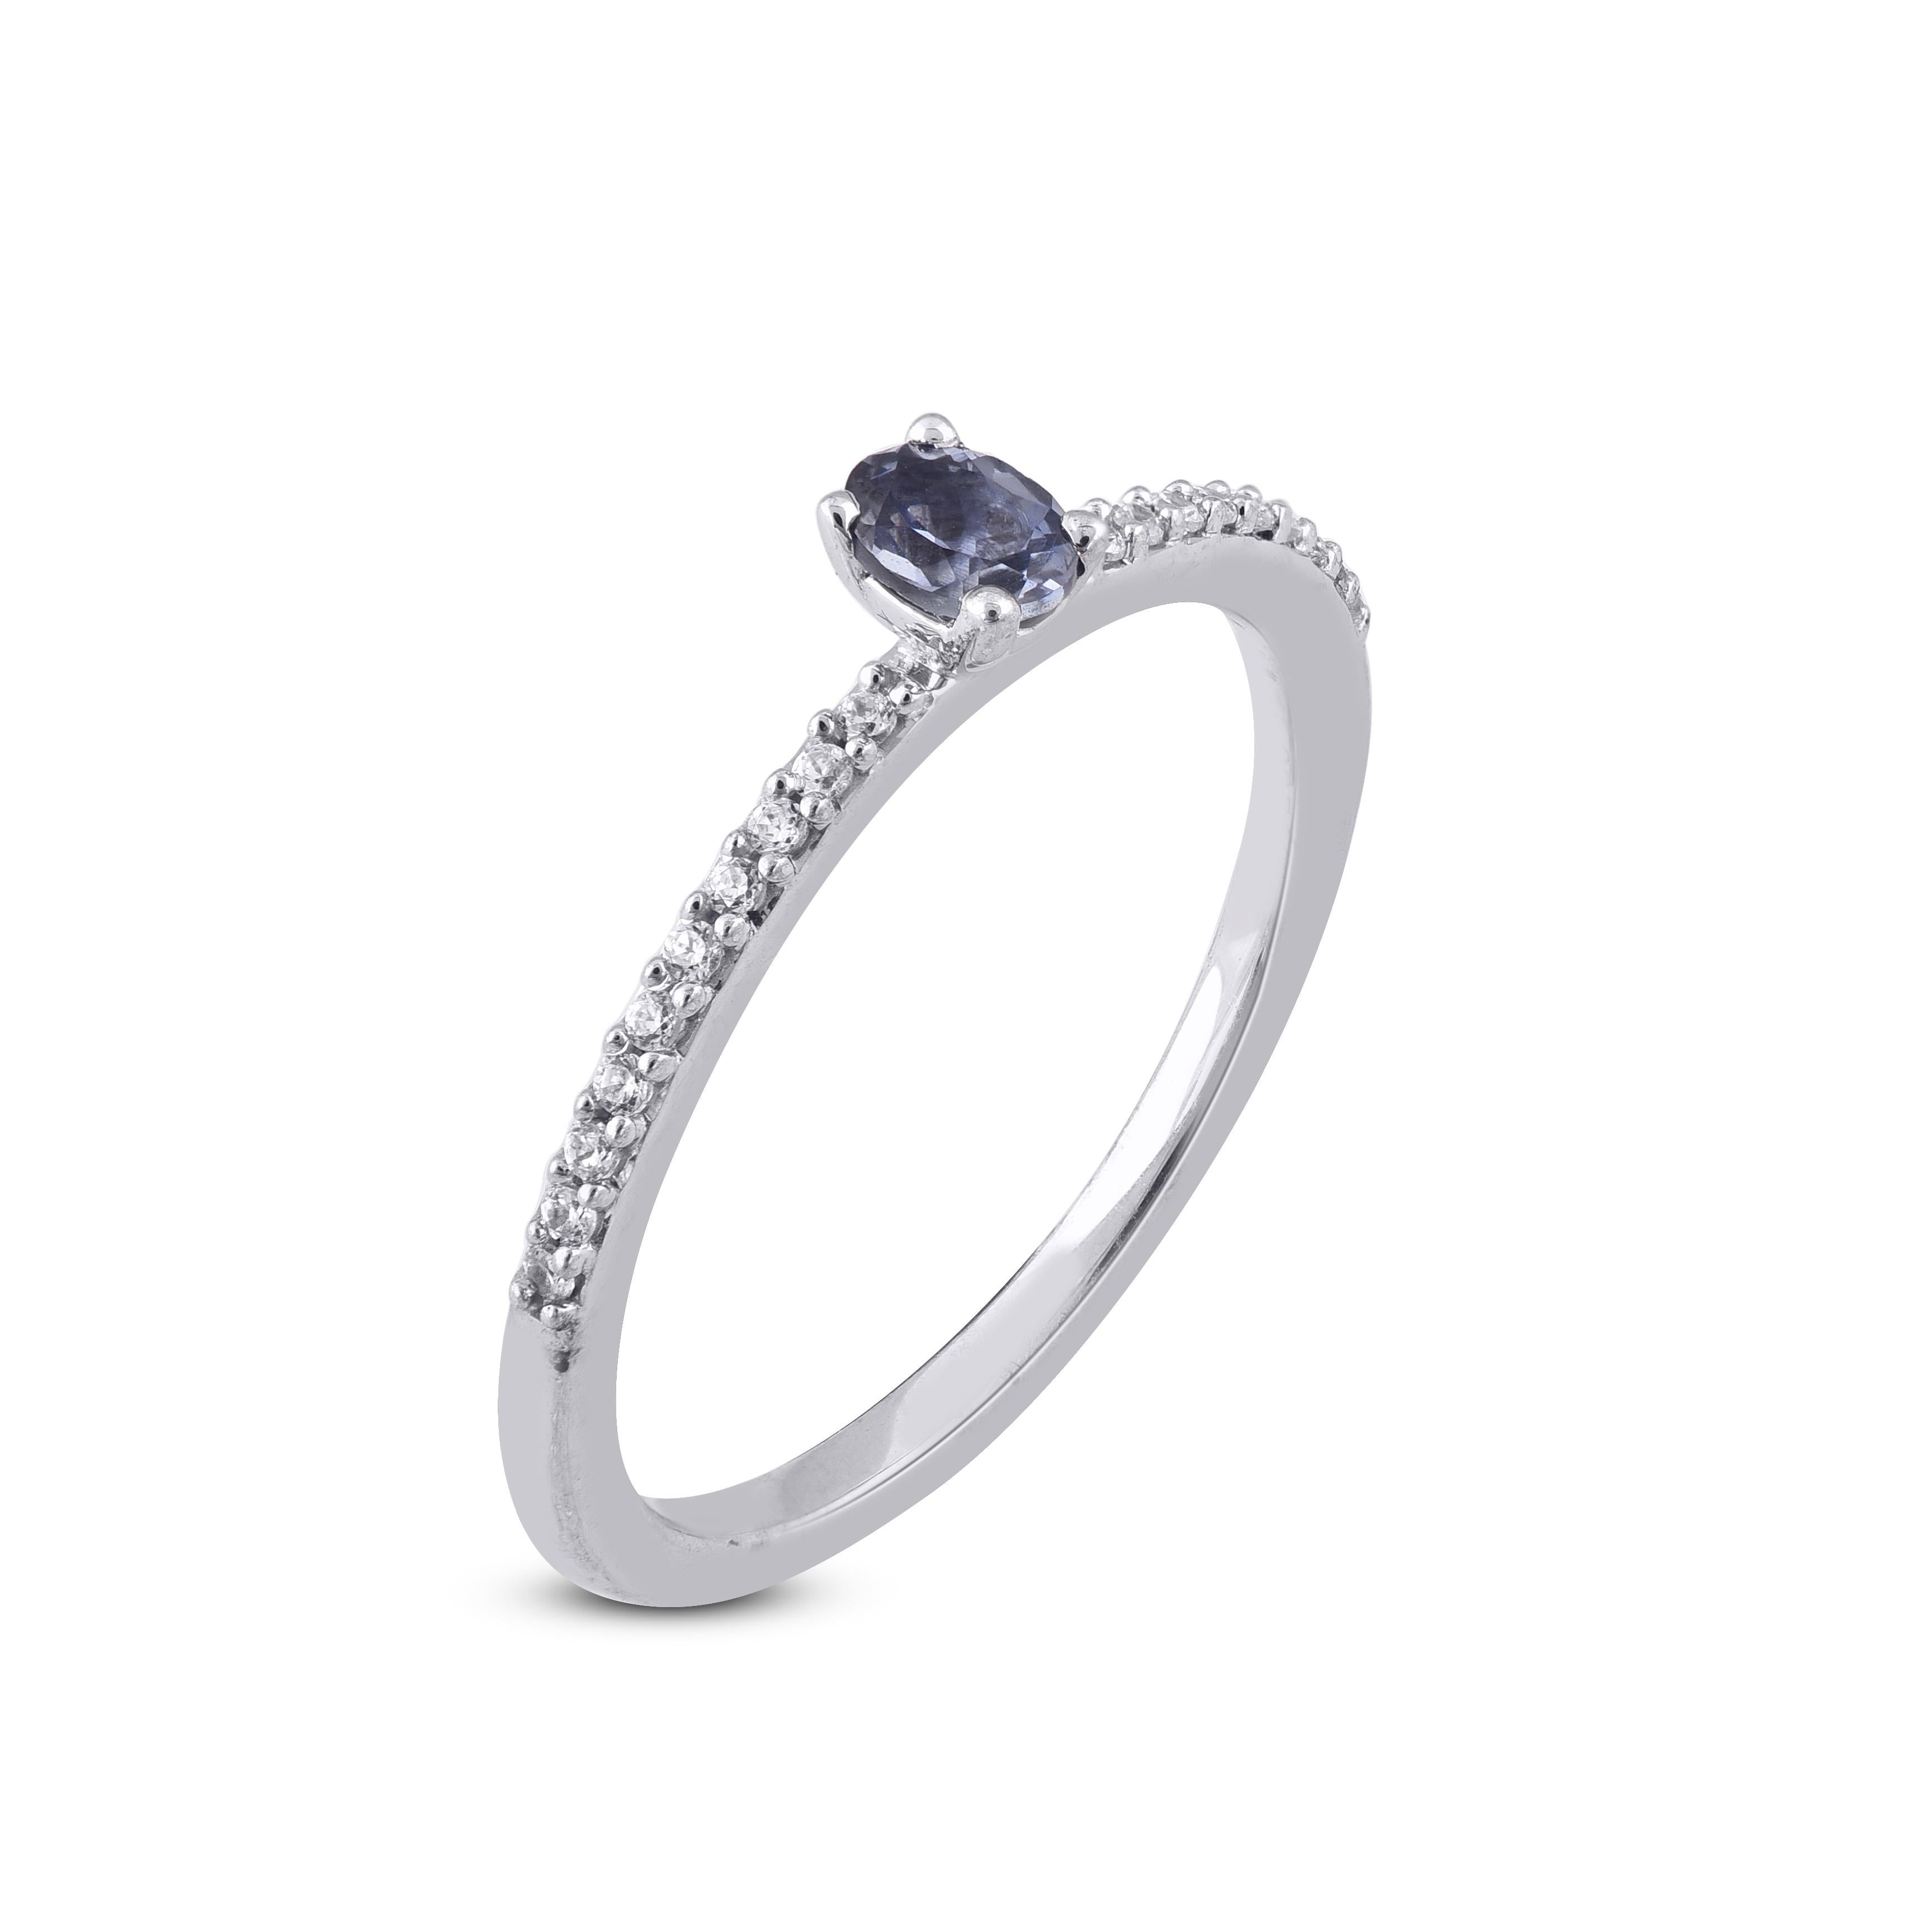 You'll adore the petite touch of shimmer these diamond ring add to your attire. Beautifully hand-crafted by our inhouse experts in 14 karat White gold and embellished with 20 round, and 1 Oval cut Tanzanite set in prong setting and shimmers with H-I